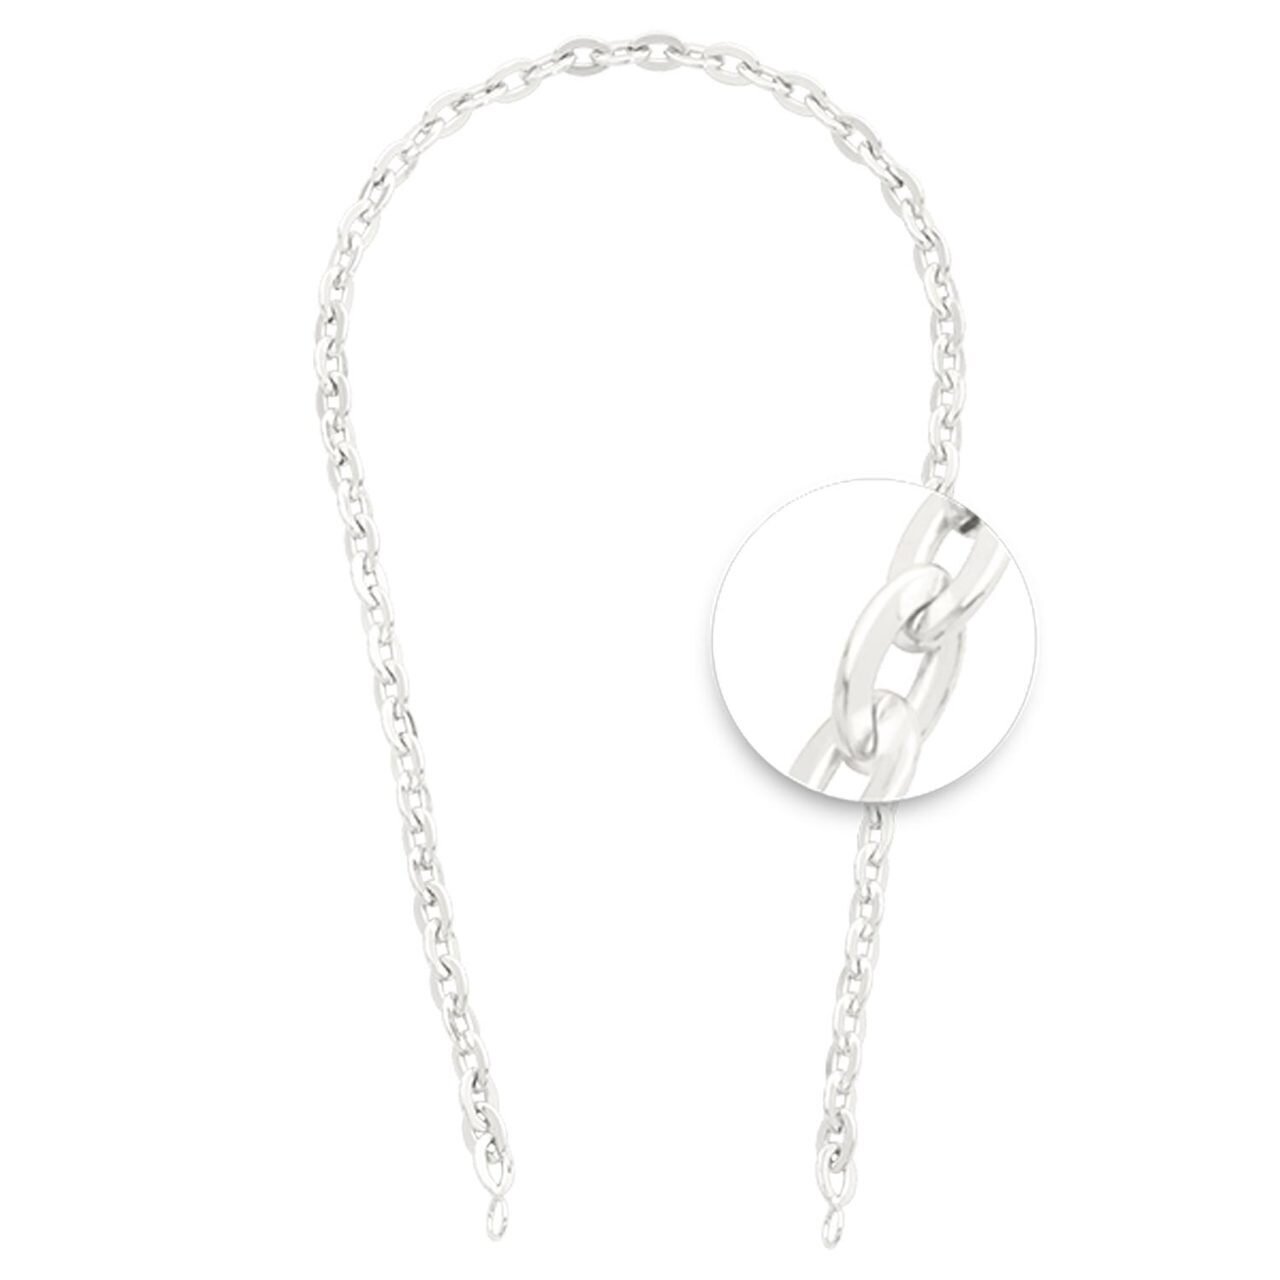 Nikki Lissoni Anchor Rolled Flat Cable Chain 6 x 8mm Silver-plated with A Silver-plated O-Ring Closure 40cm Length SN1026S40A1000S